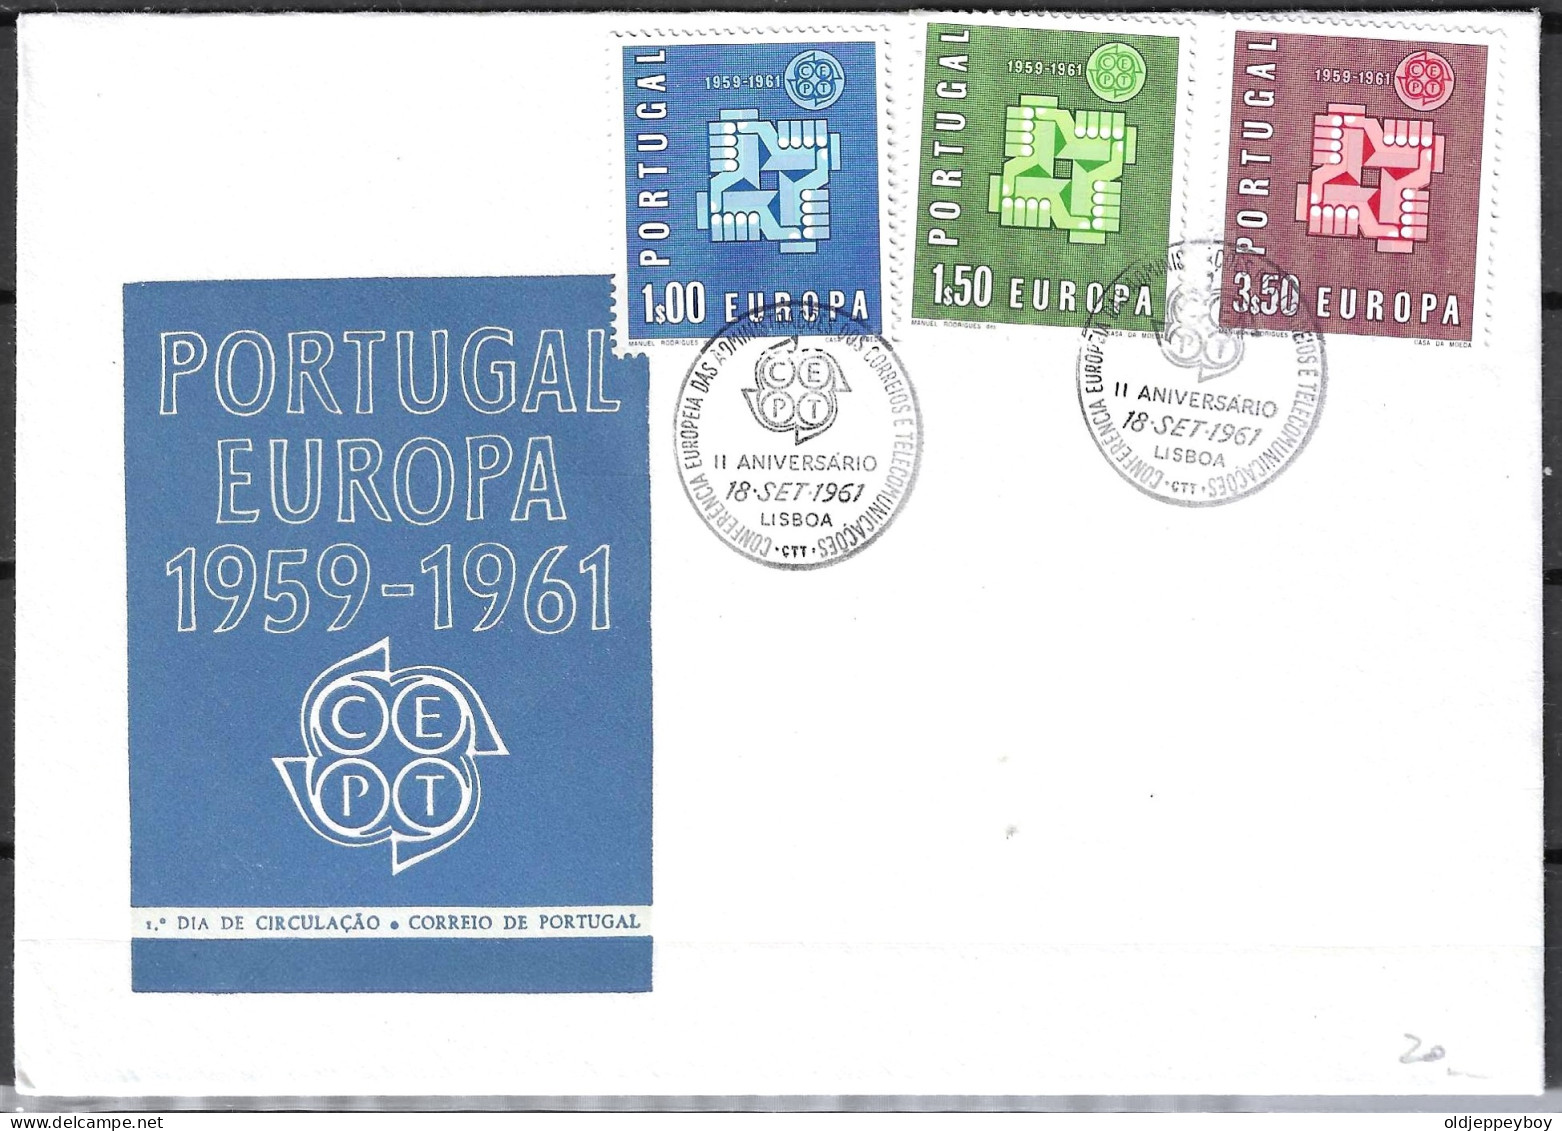 Portugal - FDC  Michel 907 / 909 - FDC - CEPT 1961 - Covers & Documents